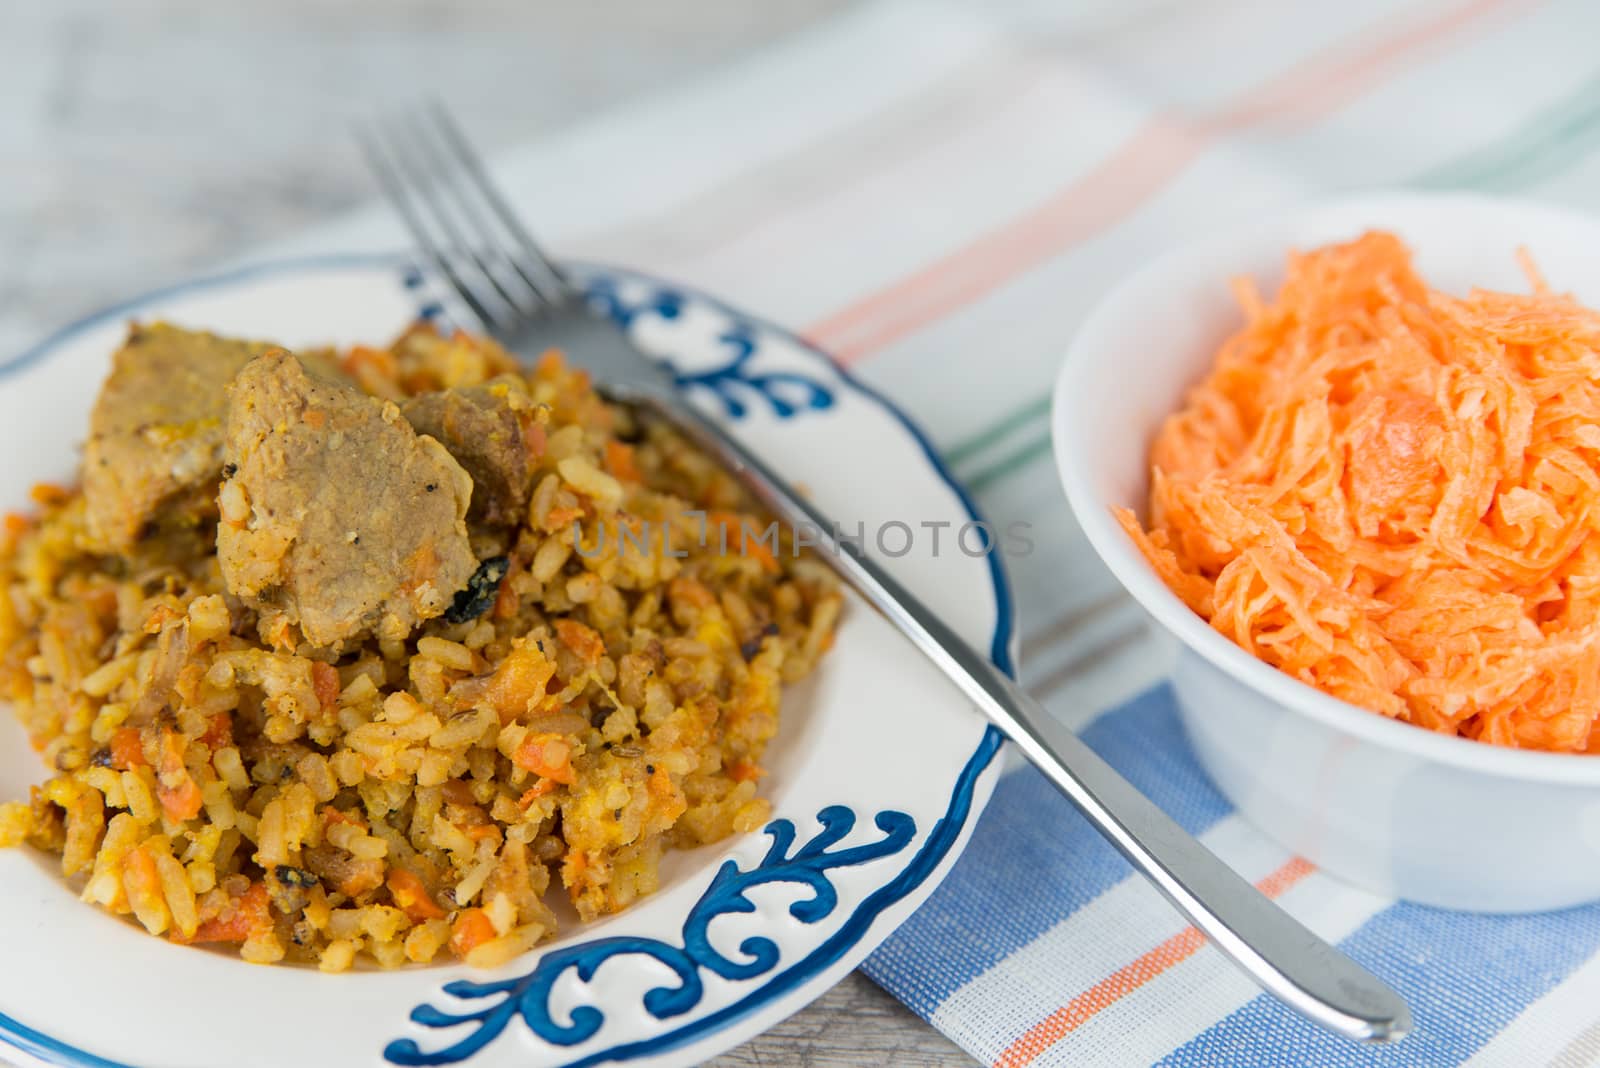 Plate of rice and meat dish pilau and carrot salad by Linaga